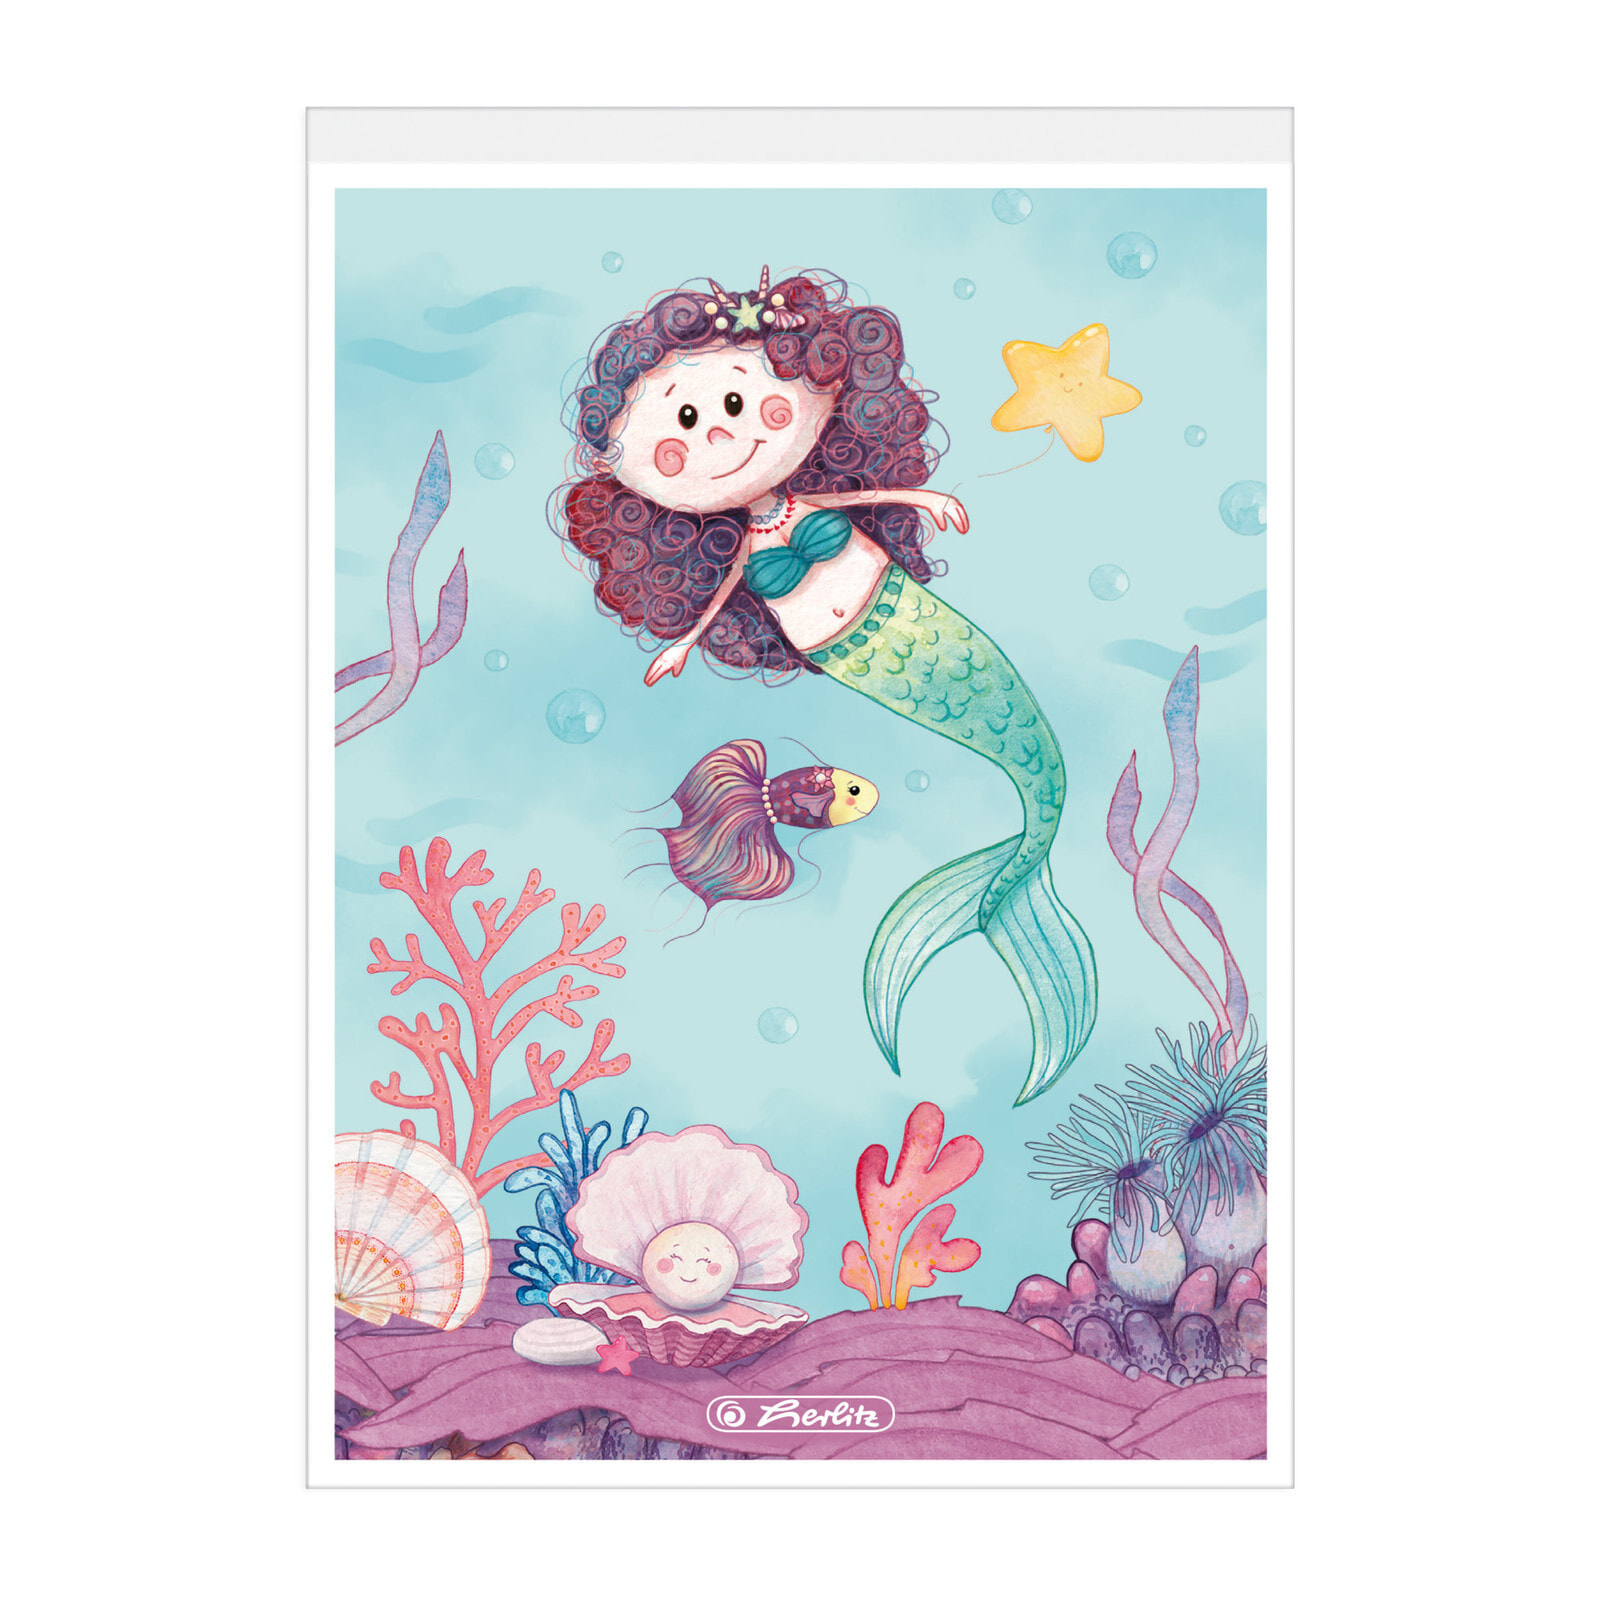 Mermaid - Image - Multicolour - A6 - 50 sheets - Squared paper - Girl